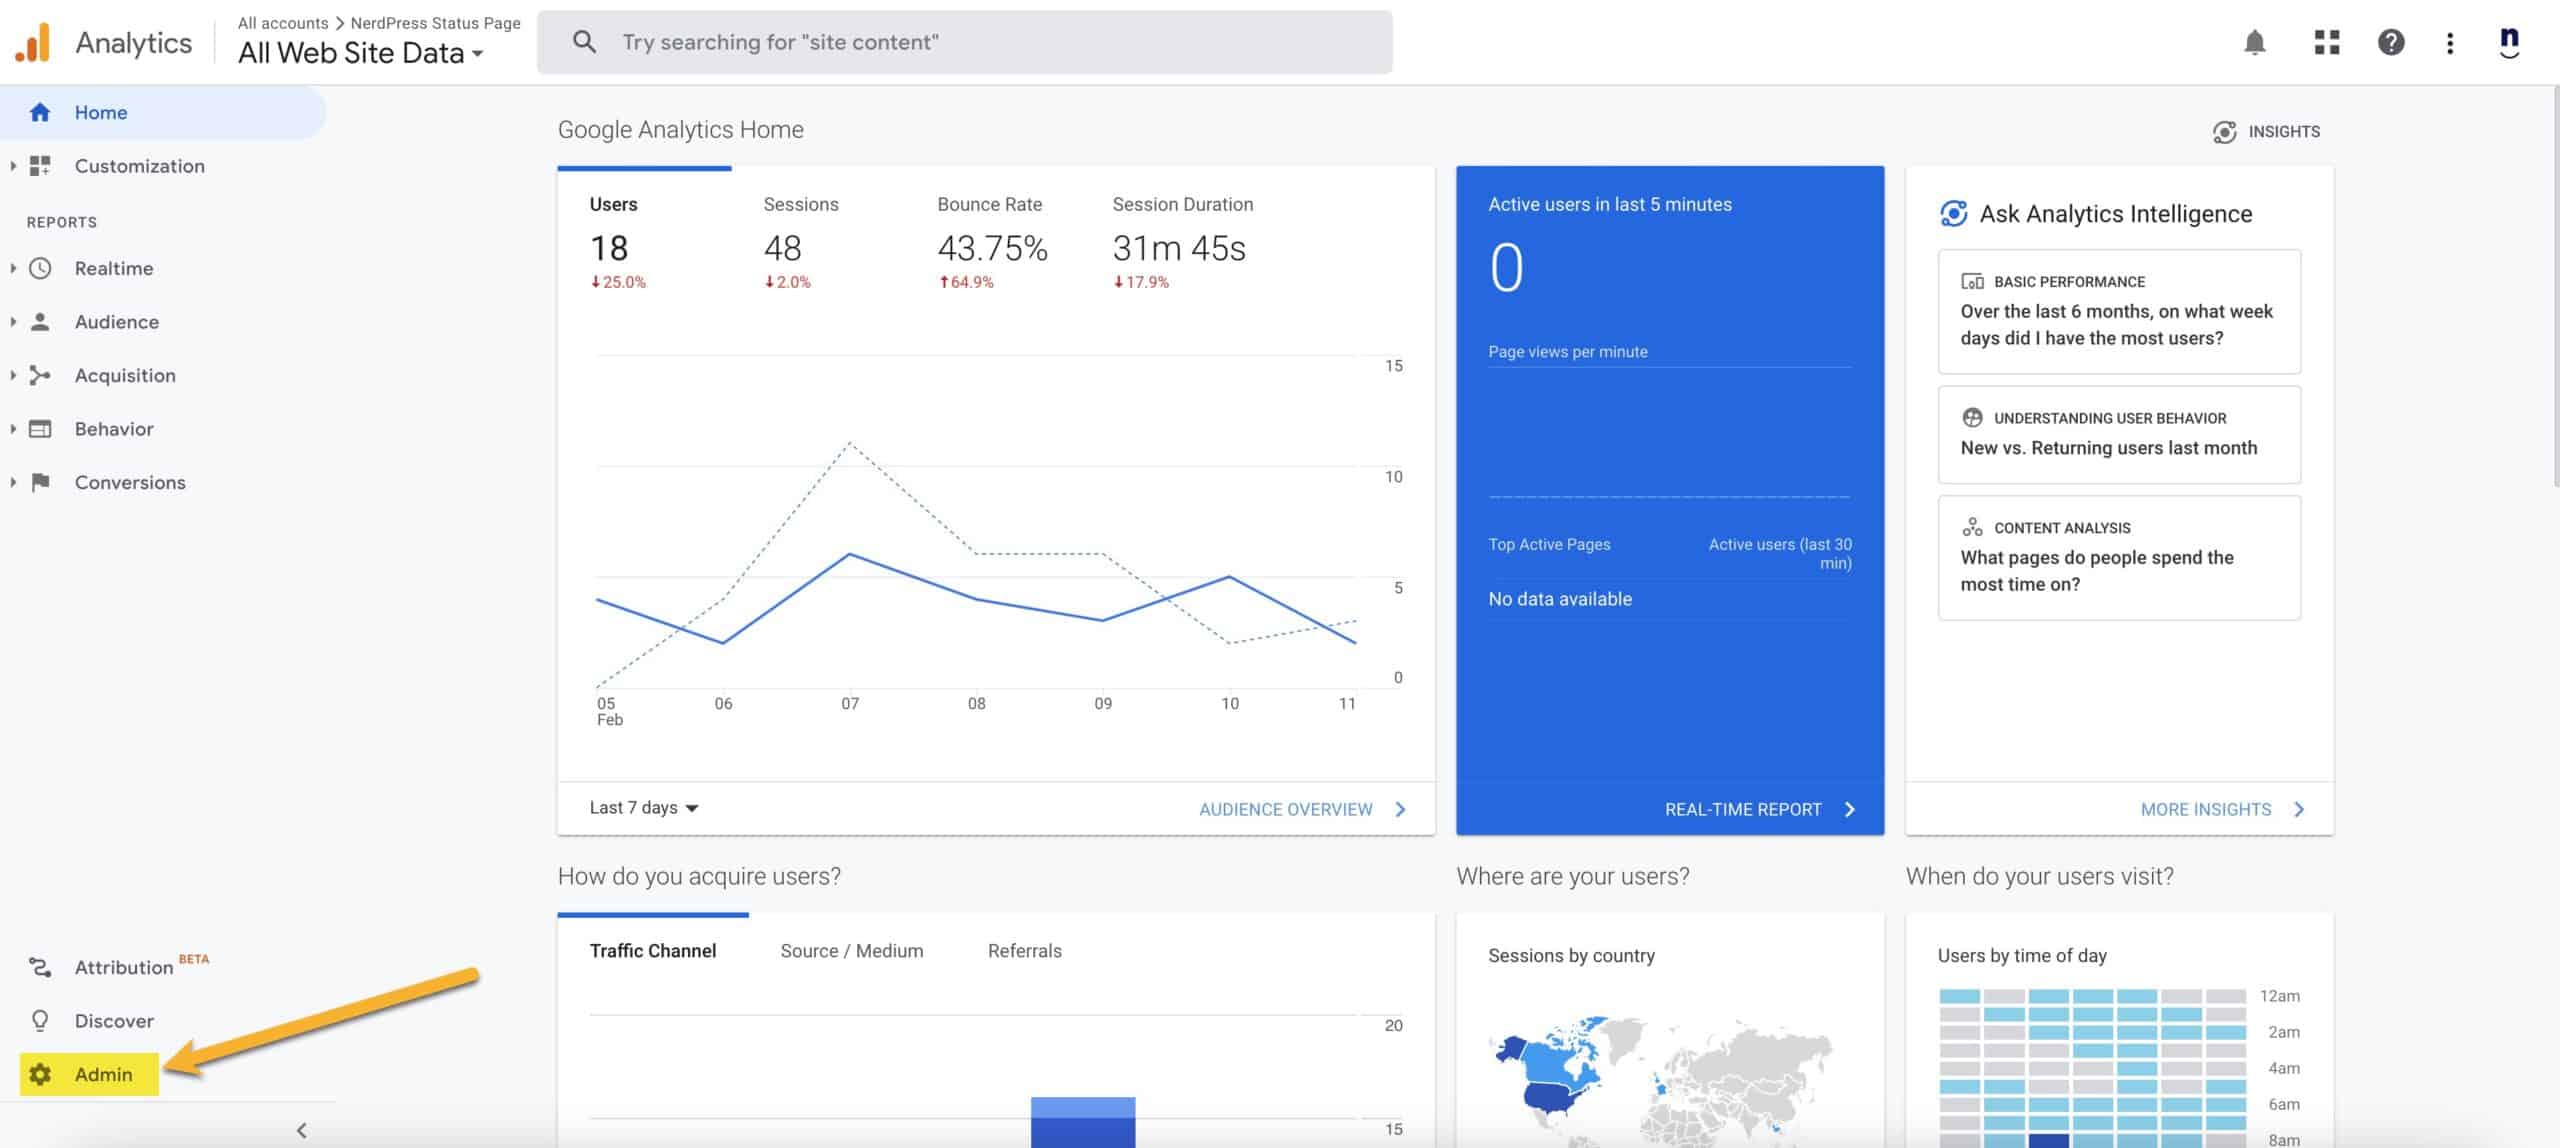 Screenshot of the Google Analytics interface, showing the link to the Admin settings.